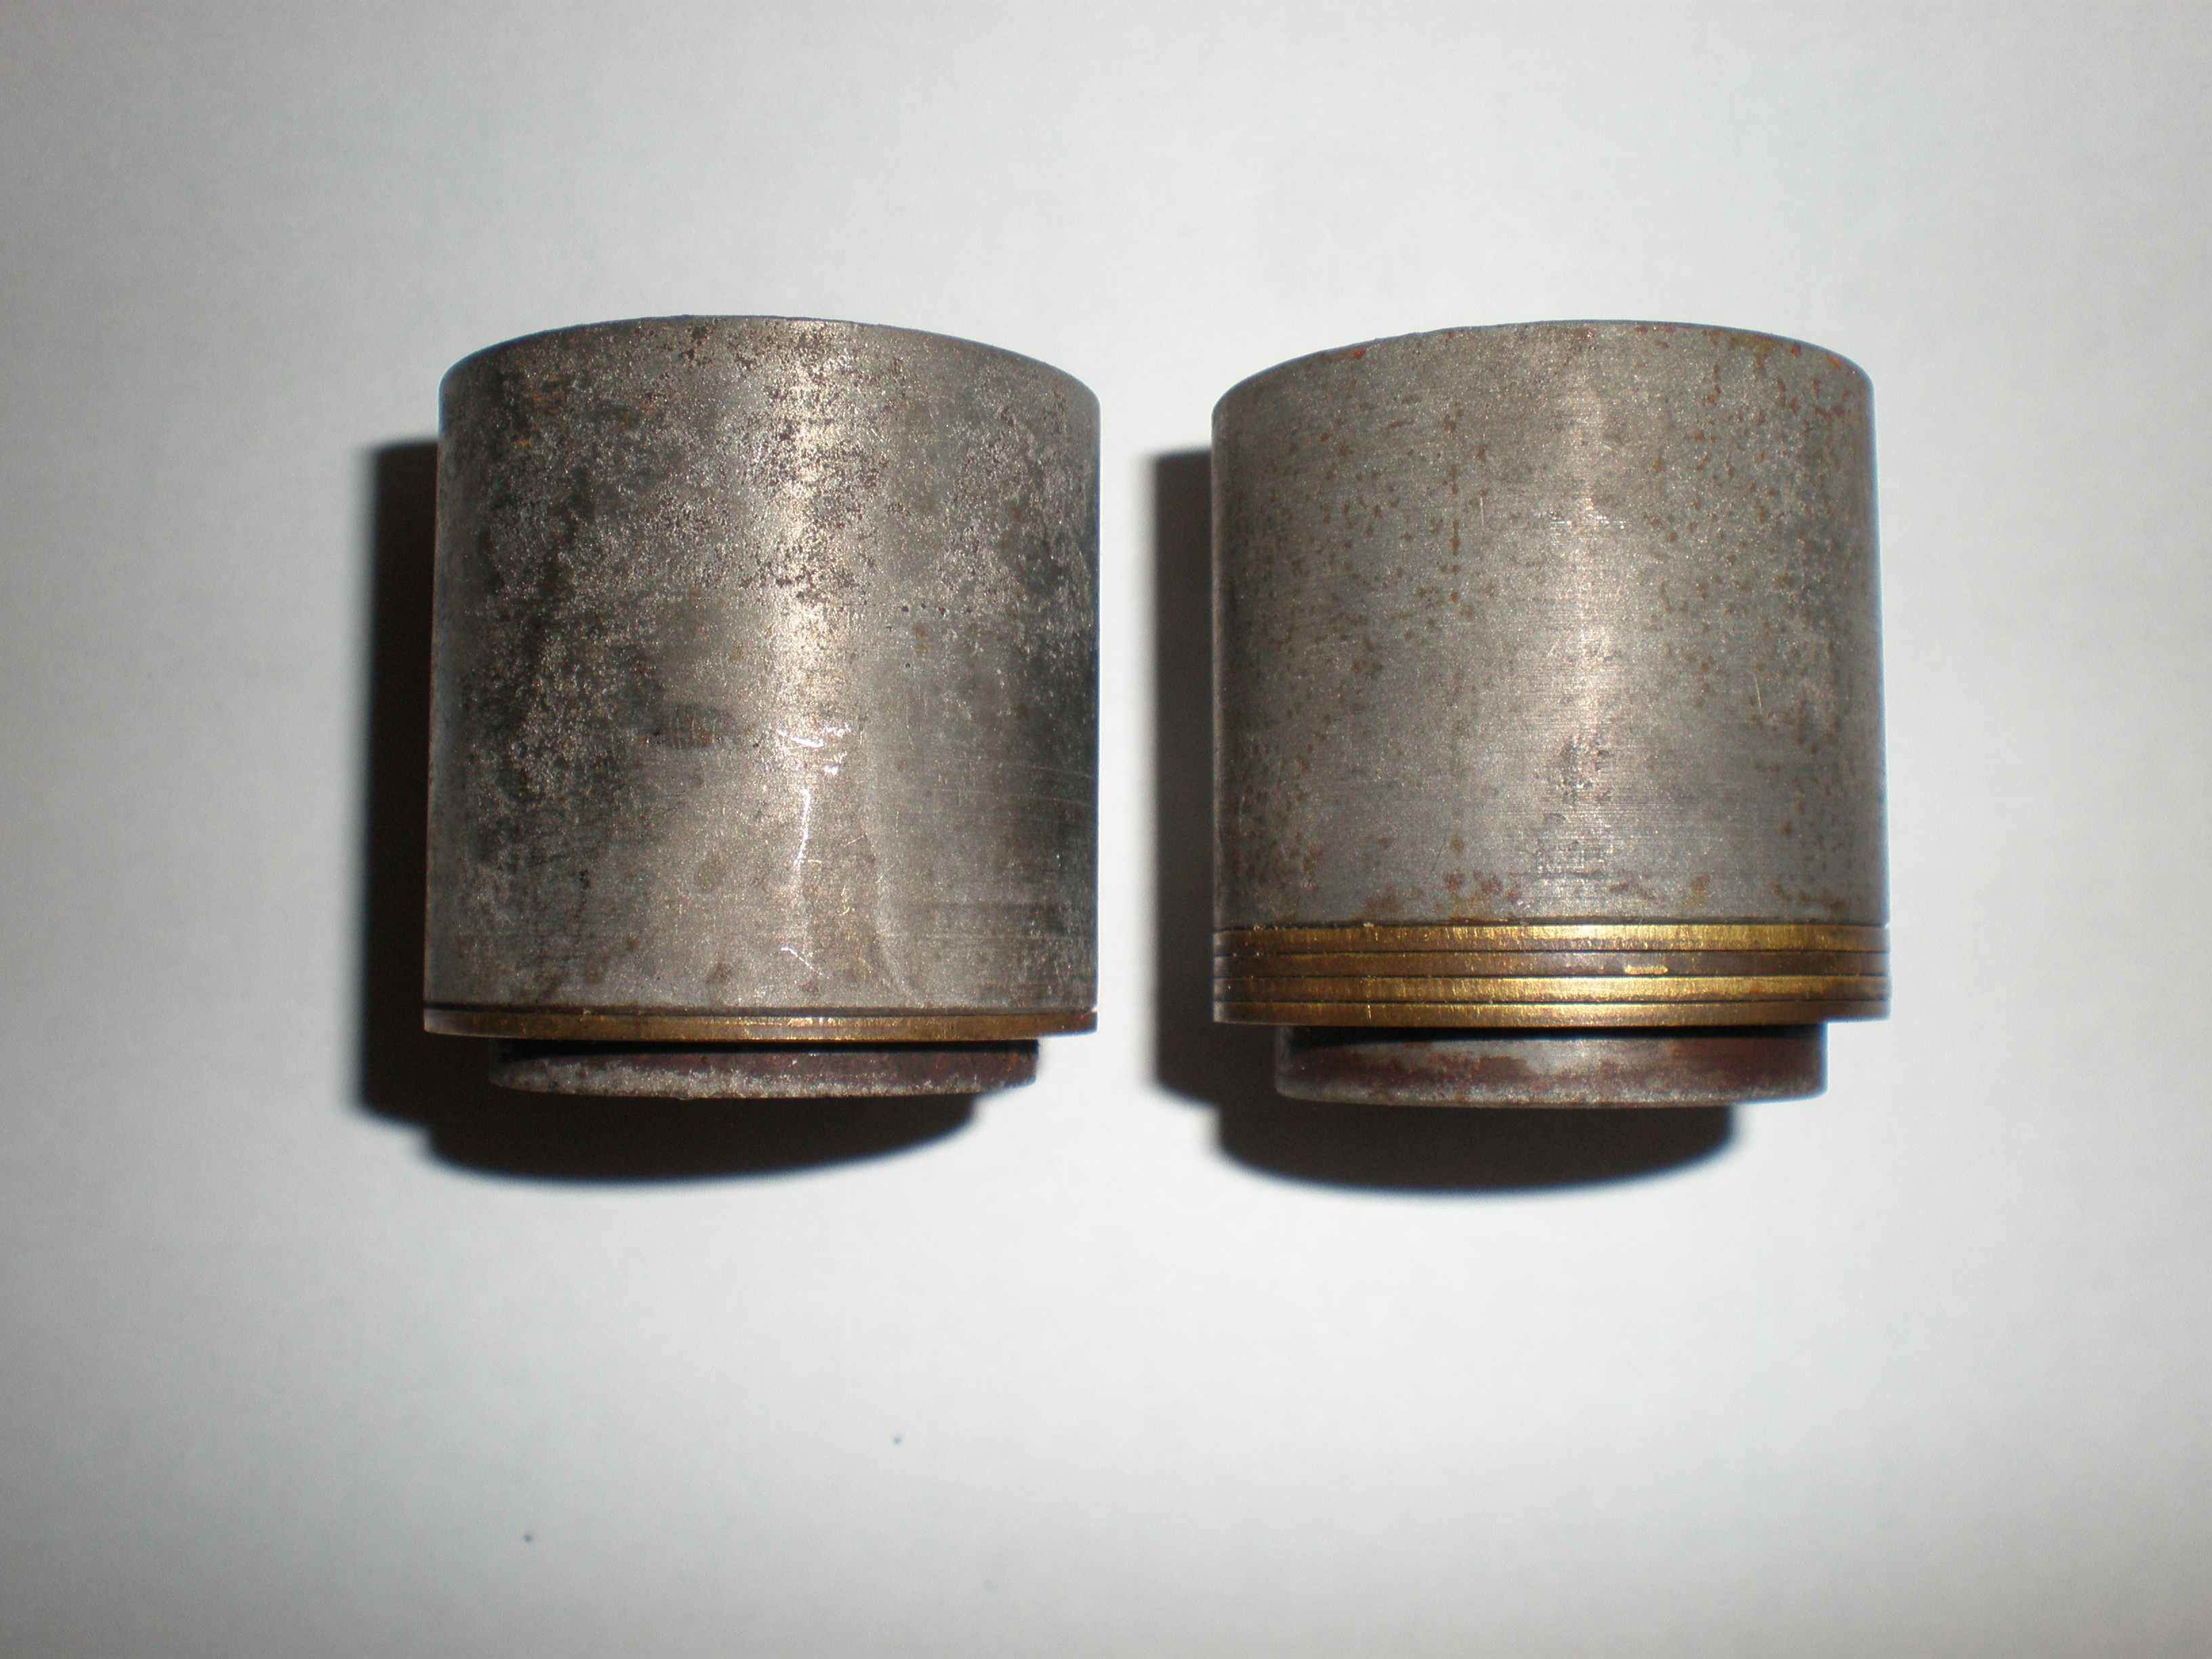 Pre-combustion chambers holders